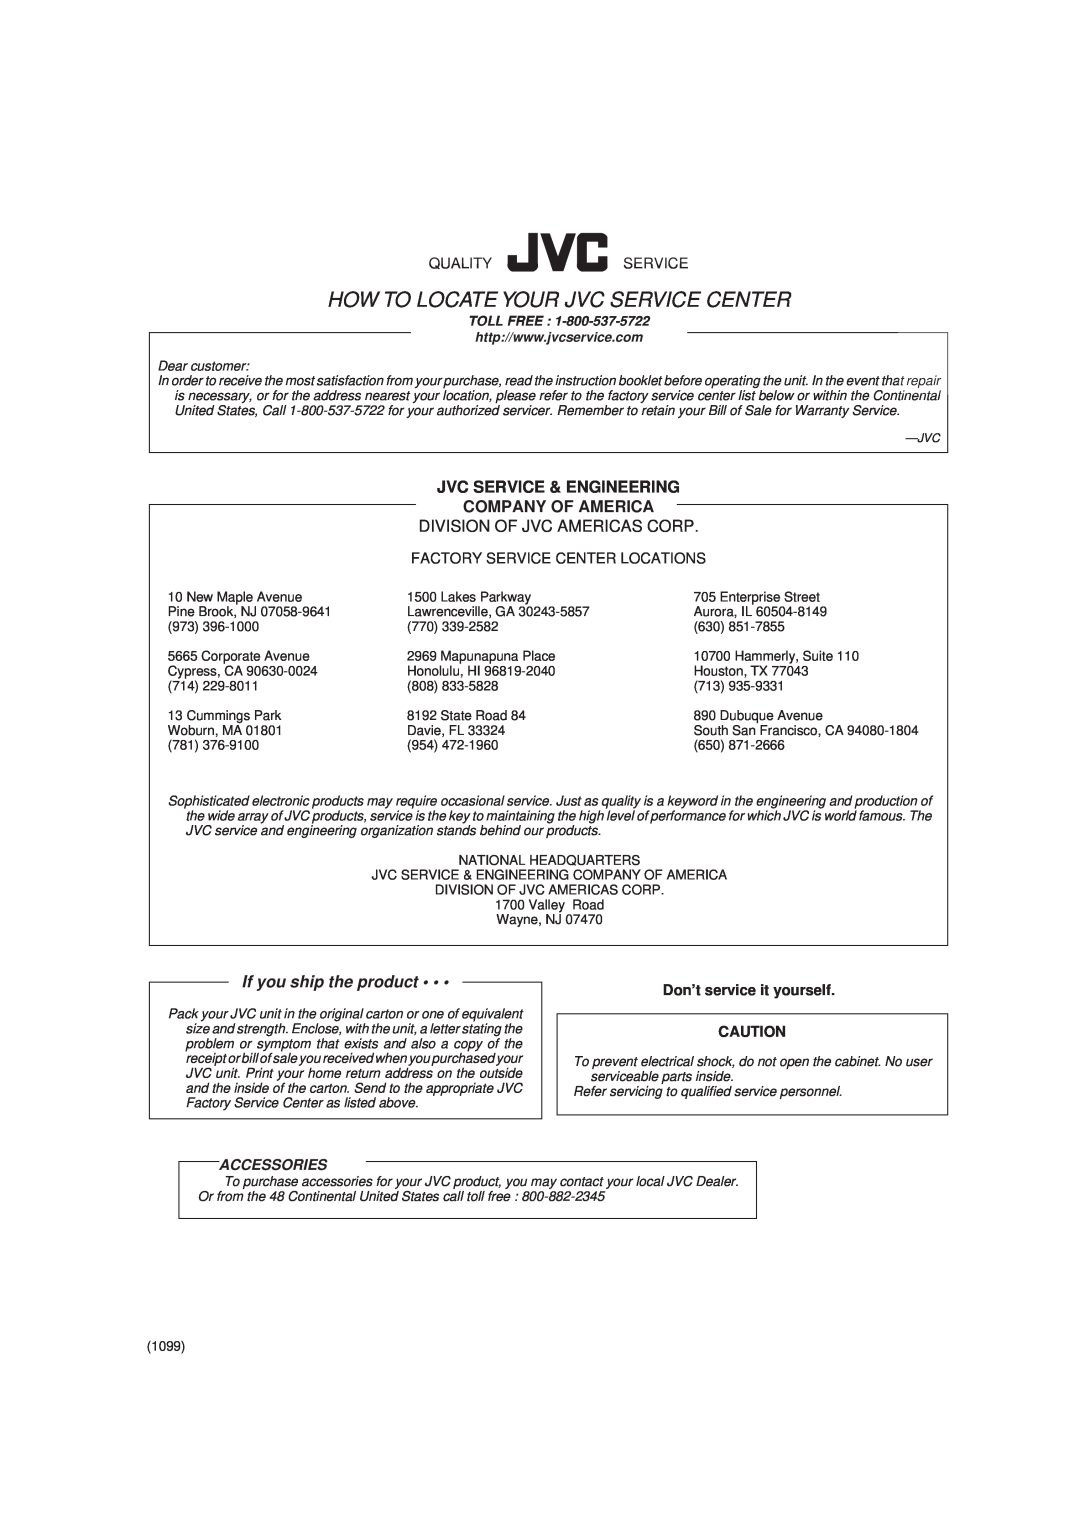 JVC MX-GT90 manual Jvc Service & Engineering Company Of America, If you ship the product, Qualityservice, Accessories 